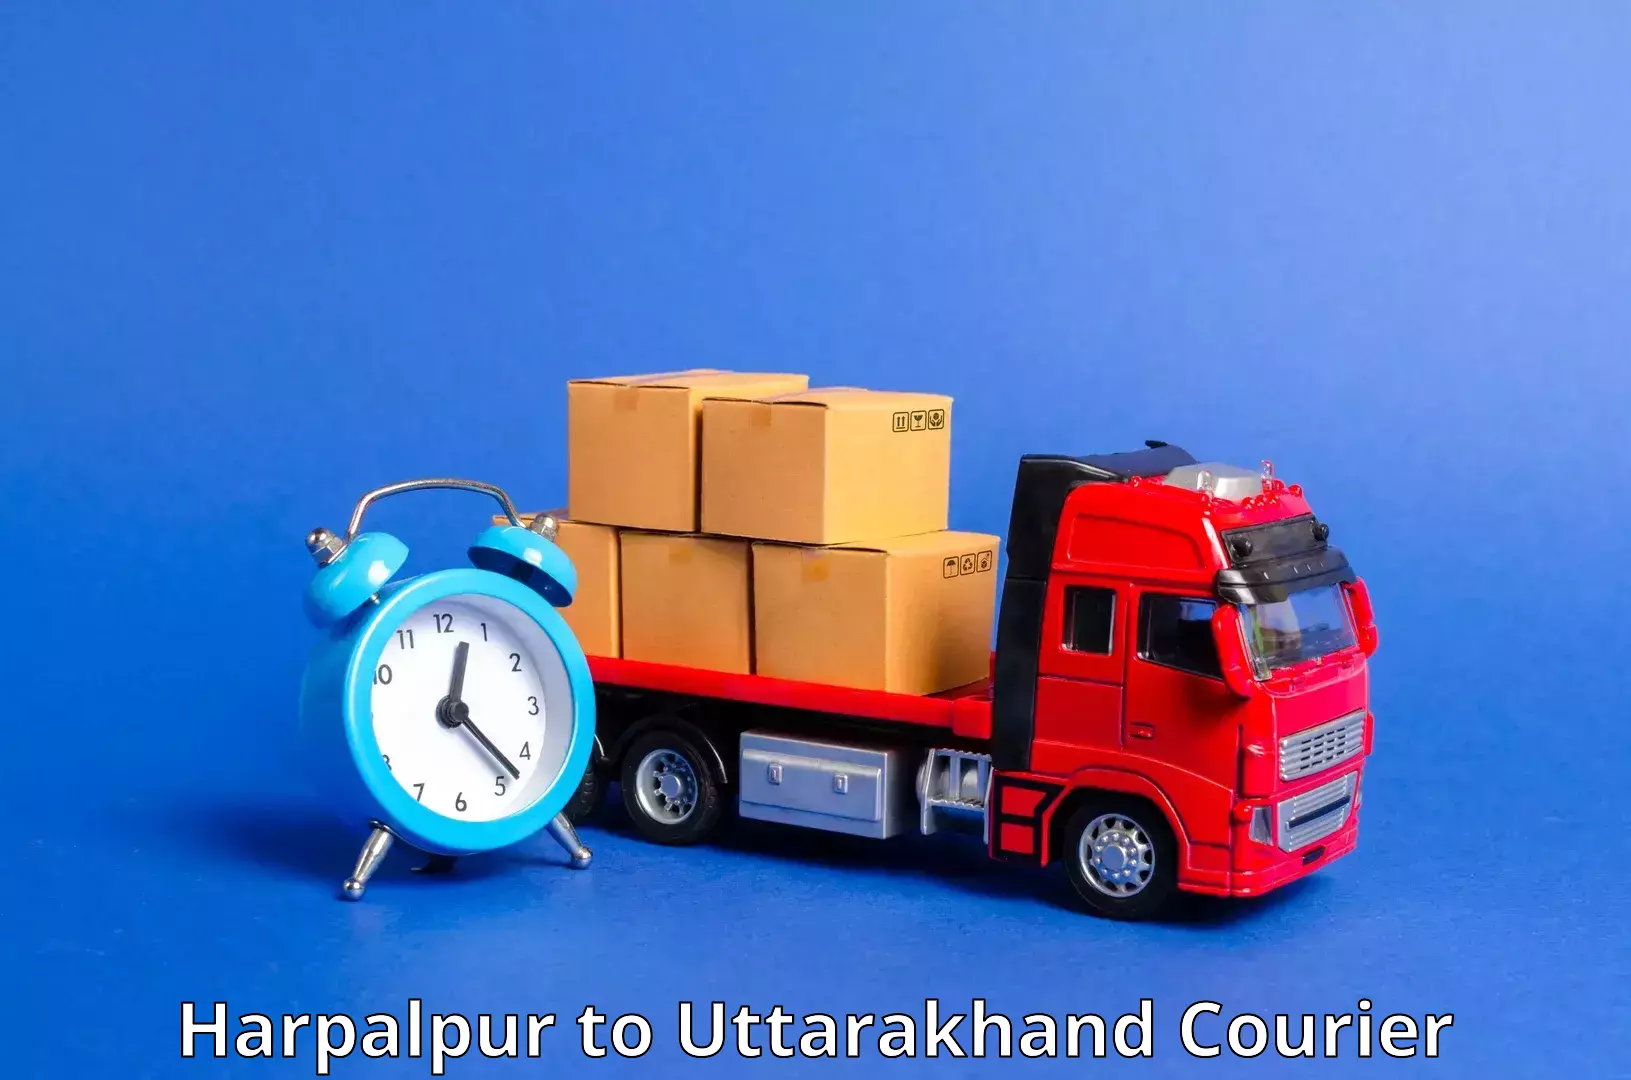 Next-day freight services Harpalpur to Almora